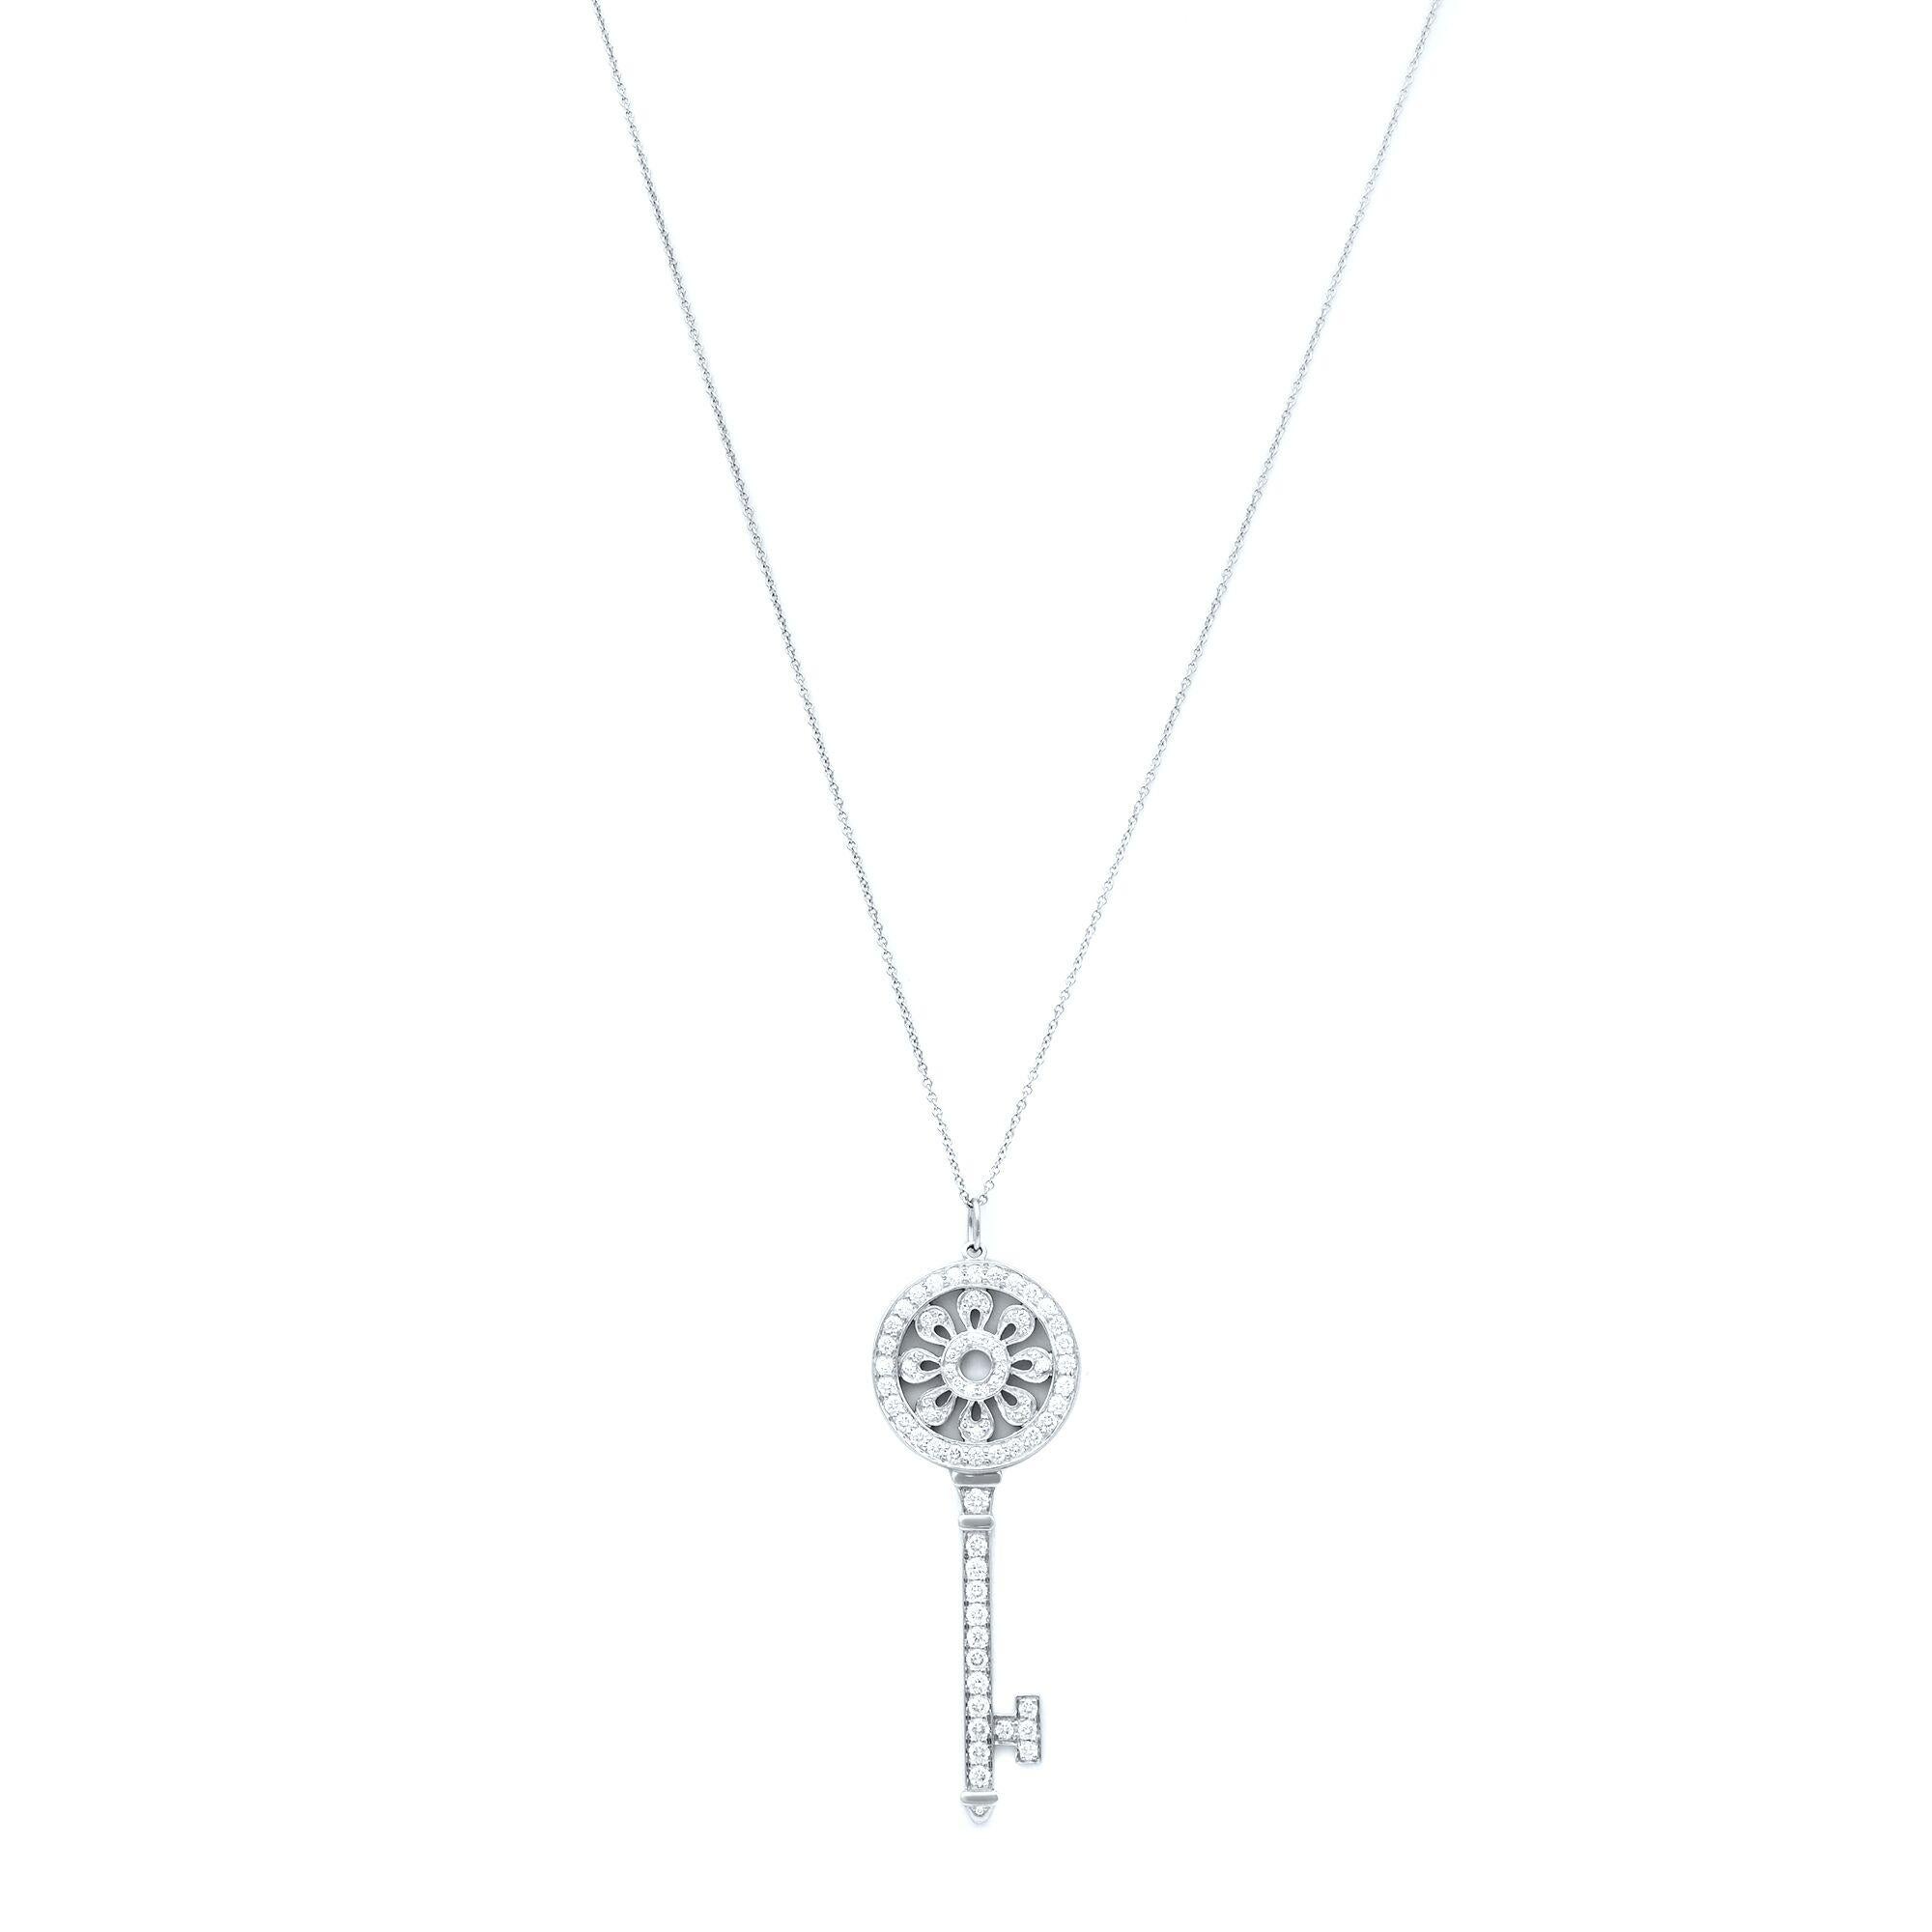 Tiffany & Co. key pendant which is made in fine platinum and pave-set with 1.18 carats of round brilliant diamonds. The pendant measures 2.5 inches in length and features an elegant flower design inside the key, completed by a 31 inch tiny link